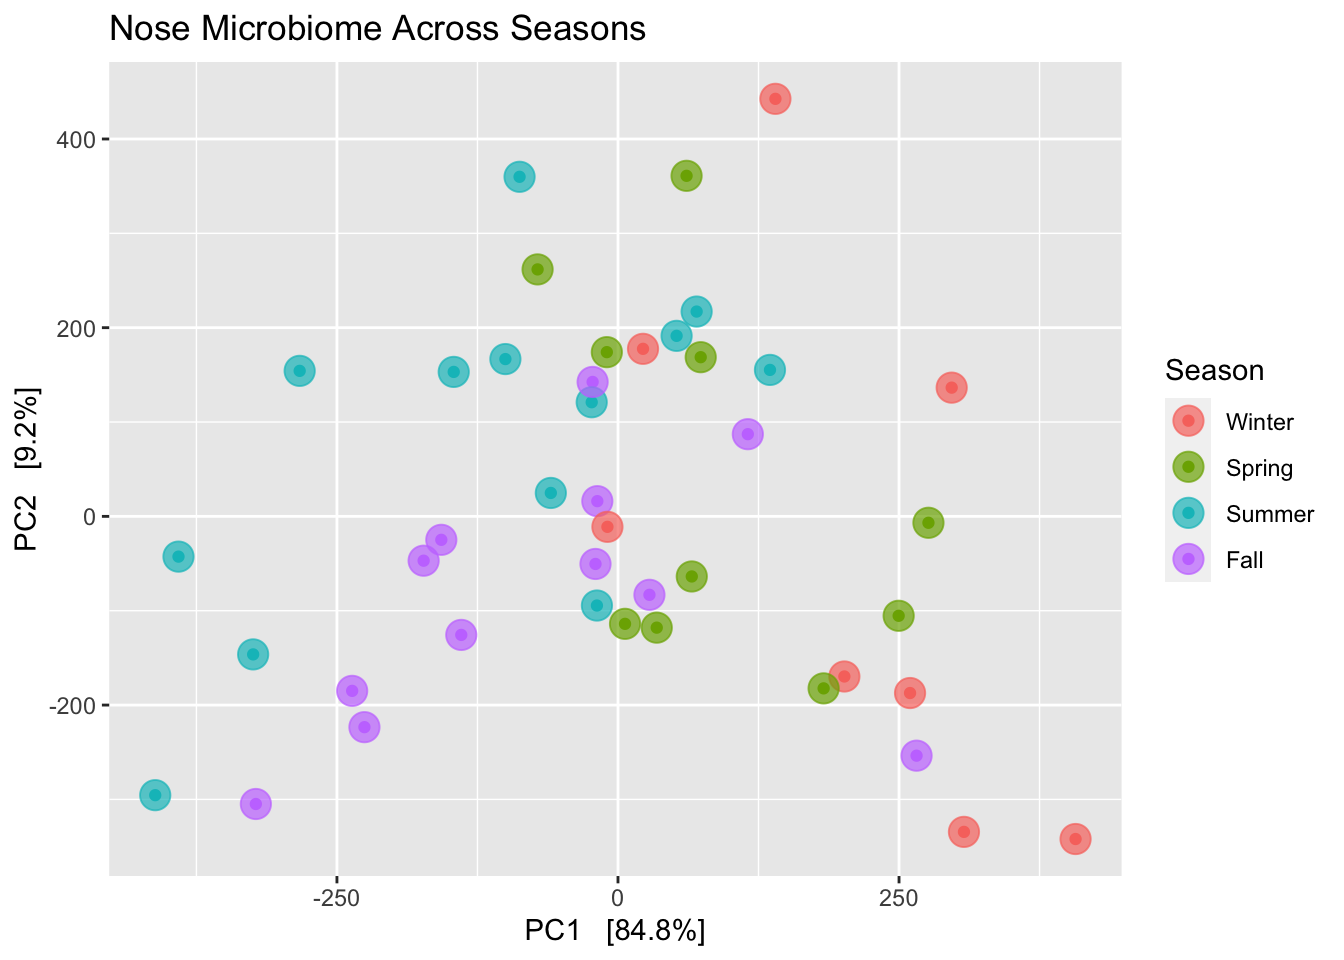 Nose microbiome across seasons in a single geography.